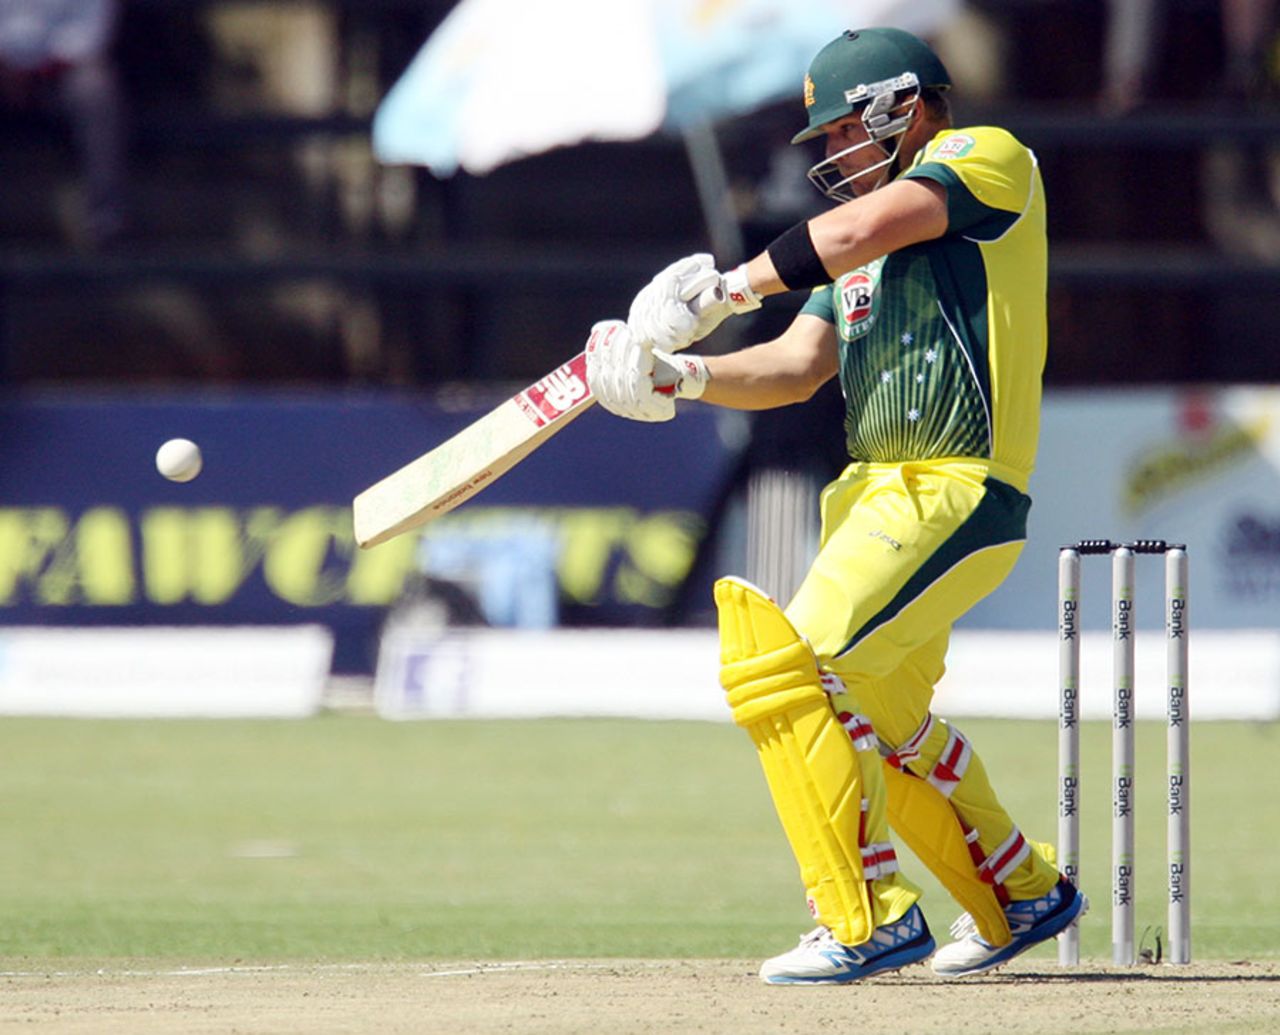 Aaron Finch slaps the ball through point, Australia v South Africa, Australia v South Africa, Tri-series, Harare, August 27, 2014
